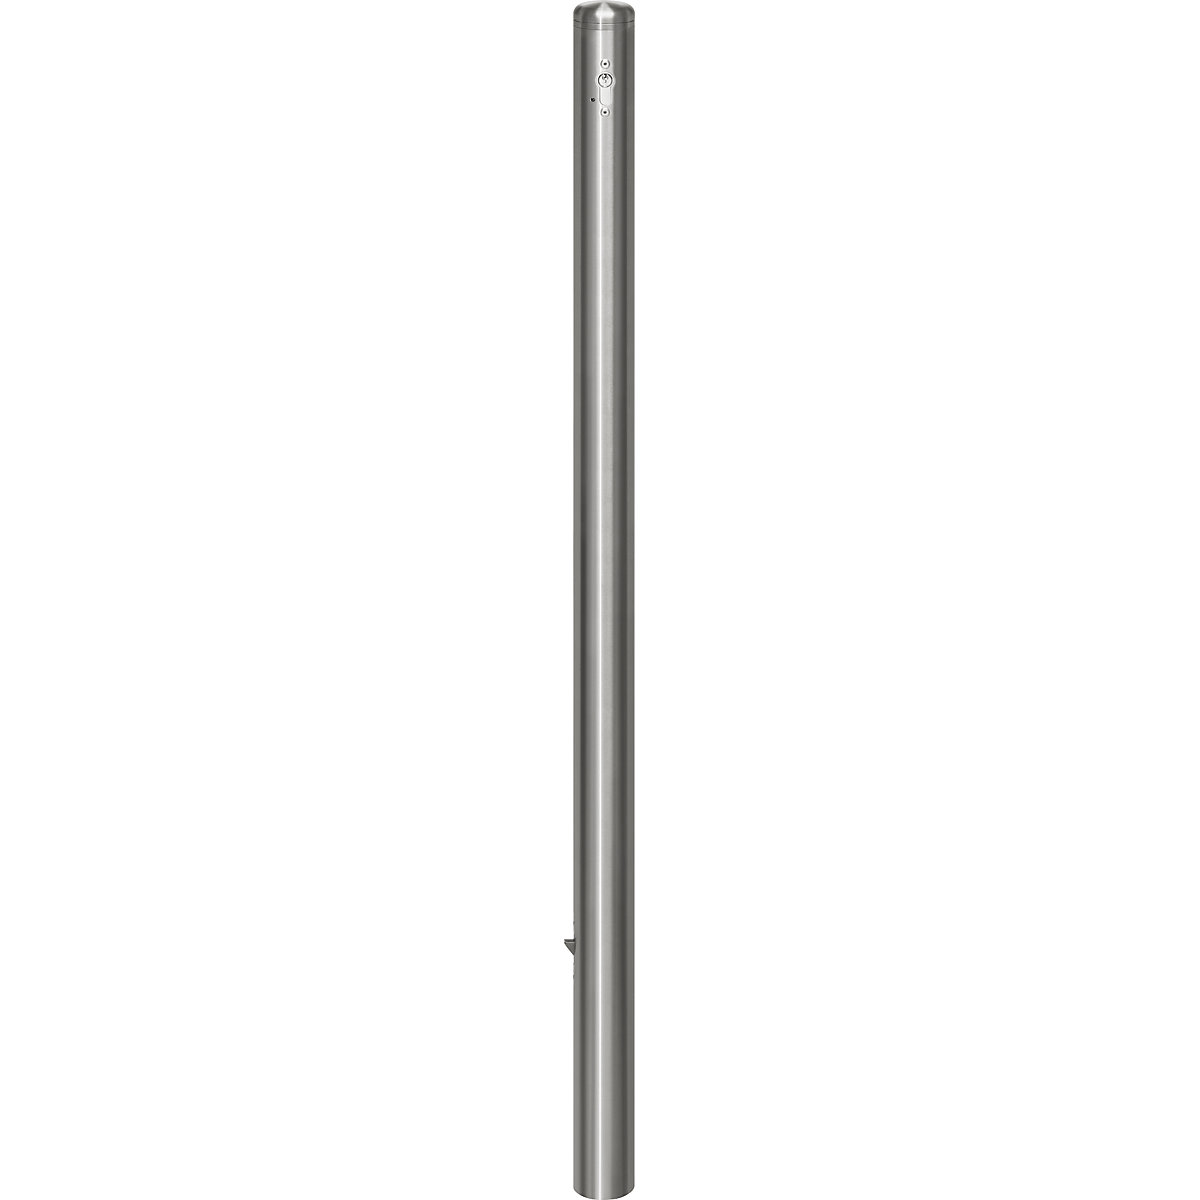 Stainless steel barrier post, with end cap, ground sleeve for concreting in, Ø 60 mm, profile cylinder-11